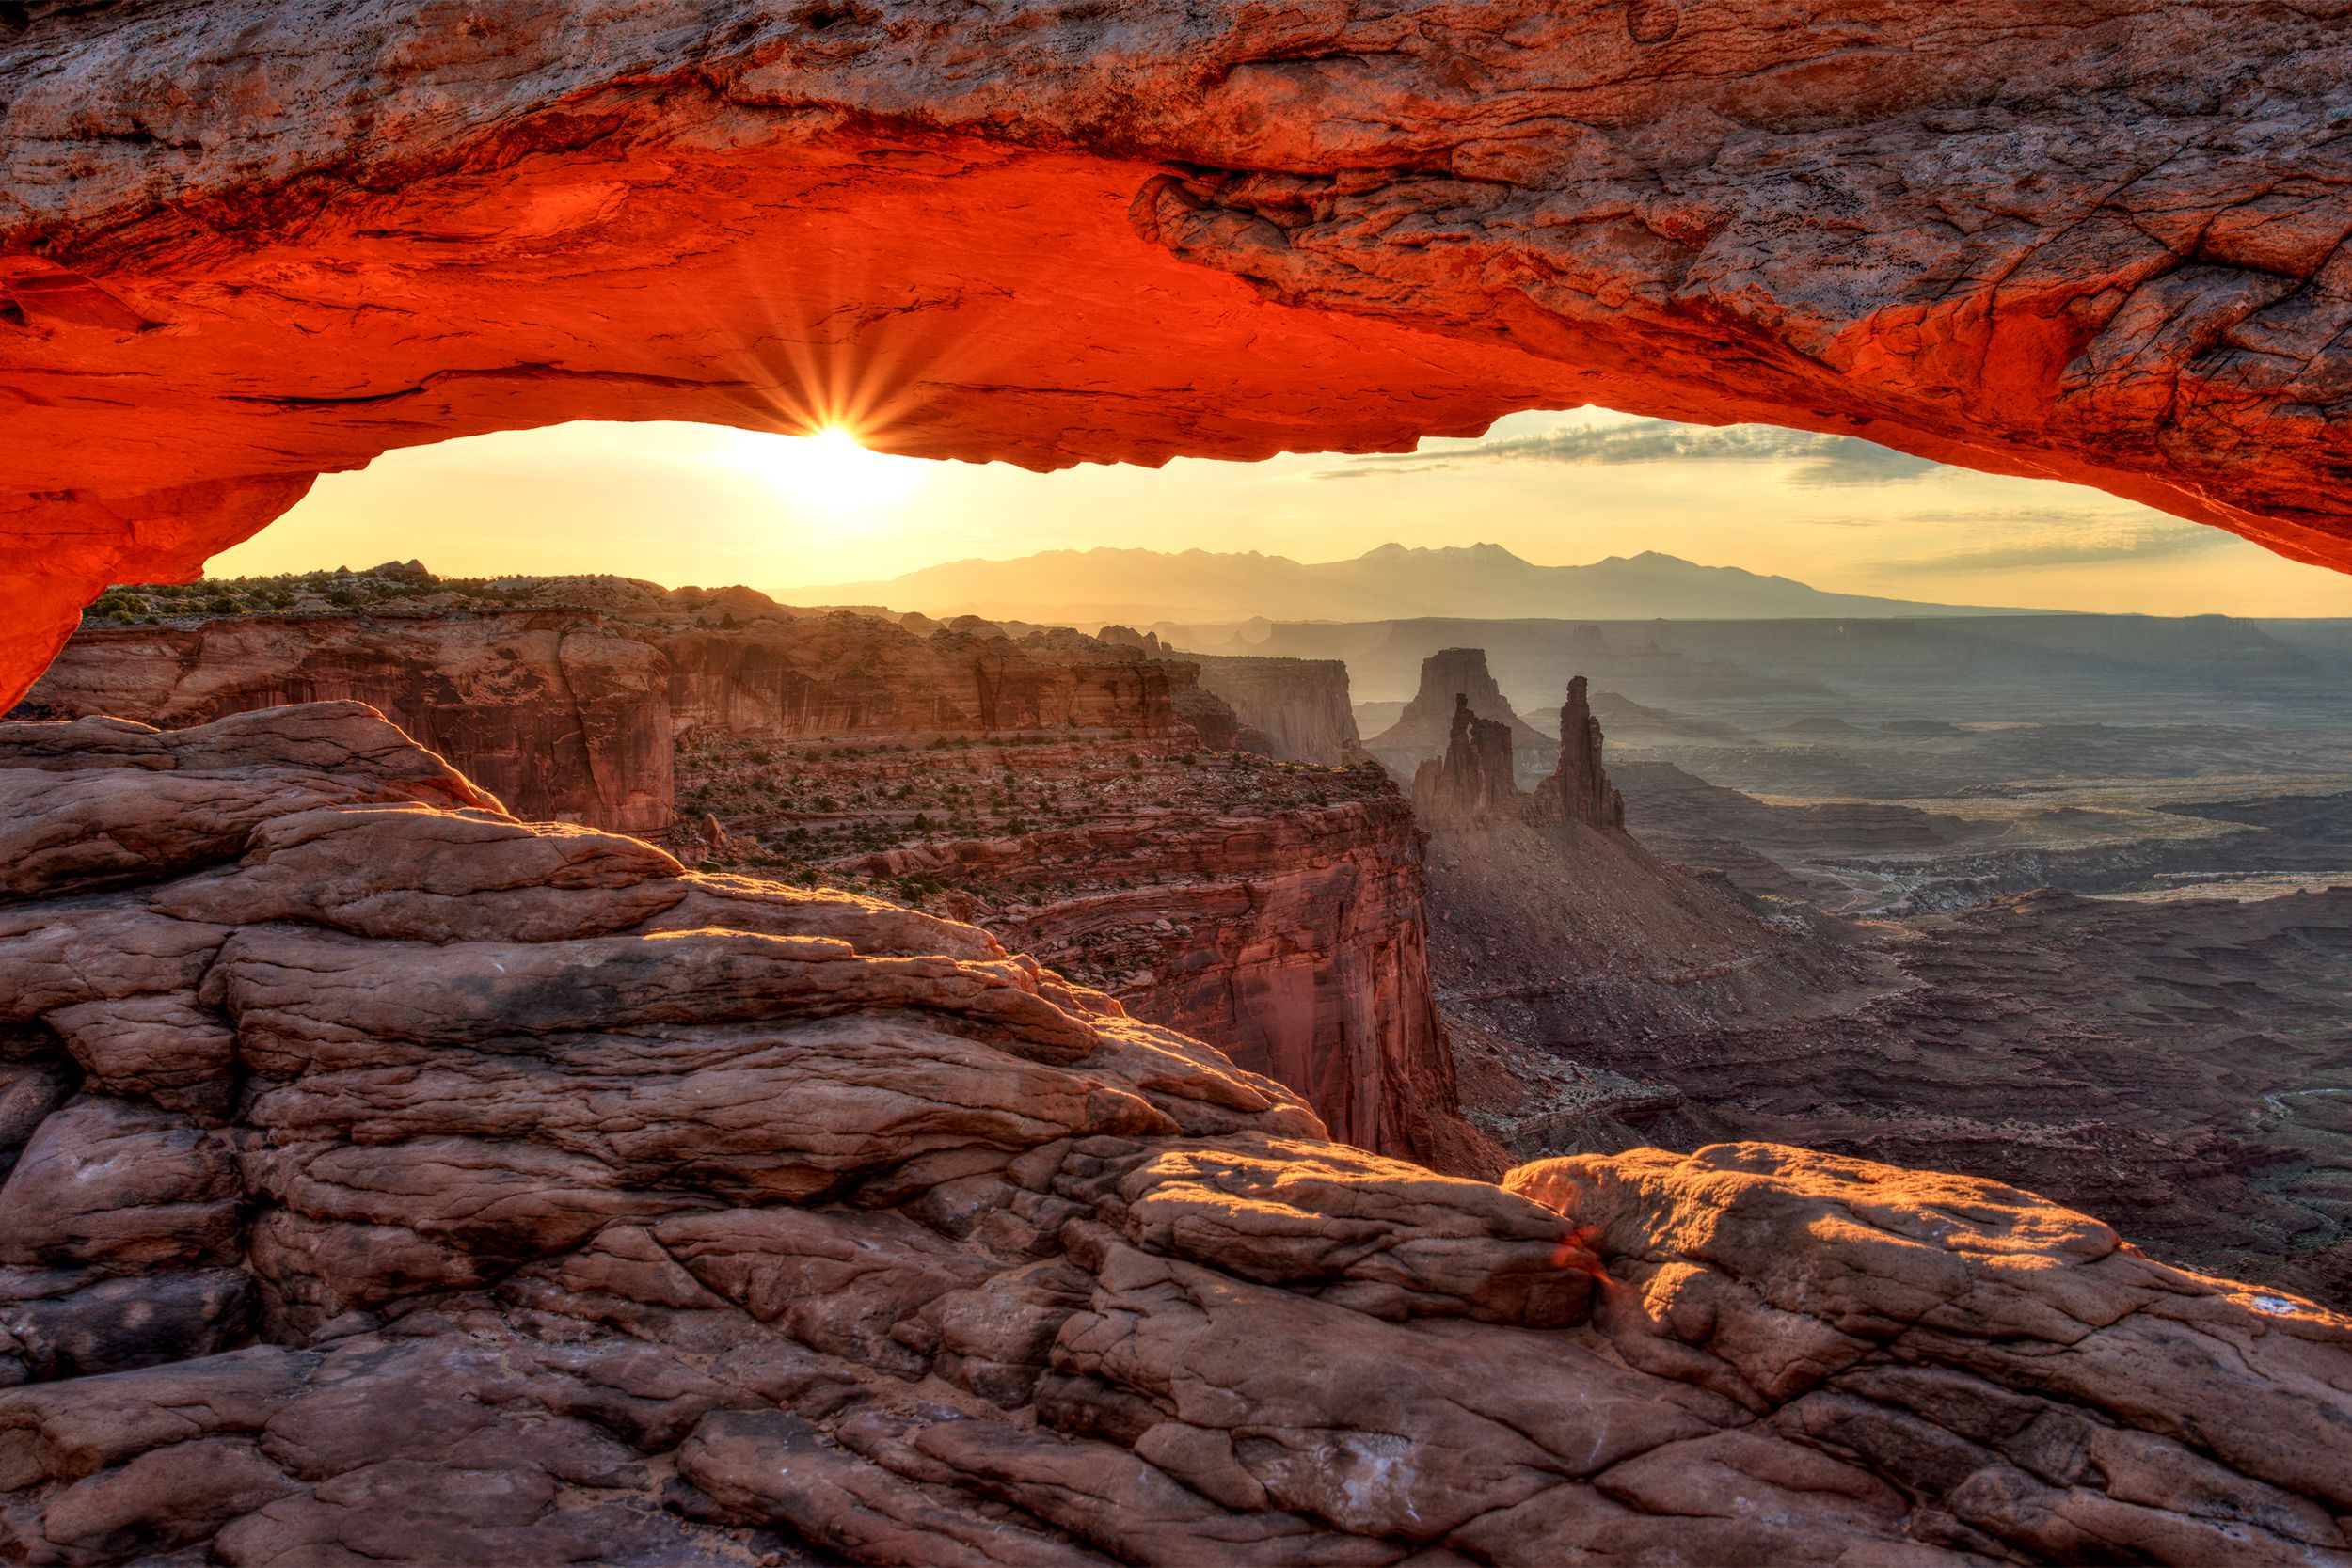 Another unforgettable and iconic national park in Utah, <a href="https://www.nps.gov/cany/index.htm">Canyonlands</a> showcases more of the unique and dramatic arches, buttes, and expansive desert landscapes that southeastern Utah is so famous for. Its immense desert landscape is home to hundreds of colorful canyons.